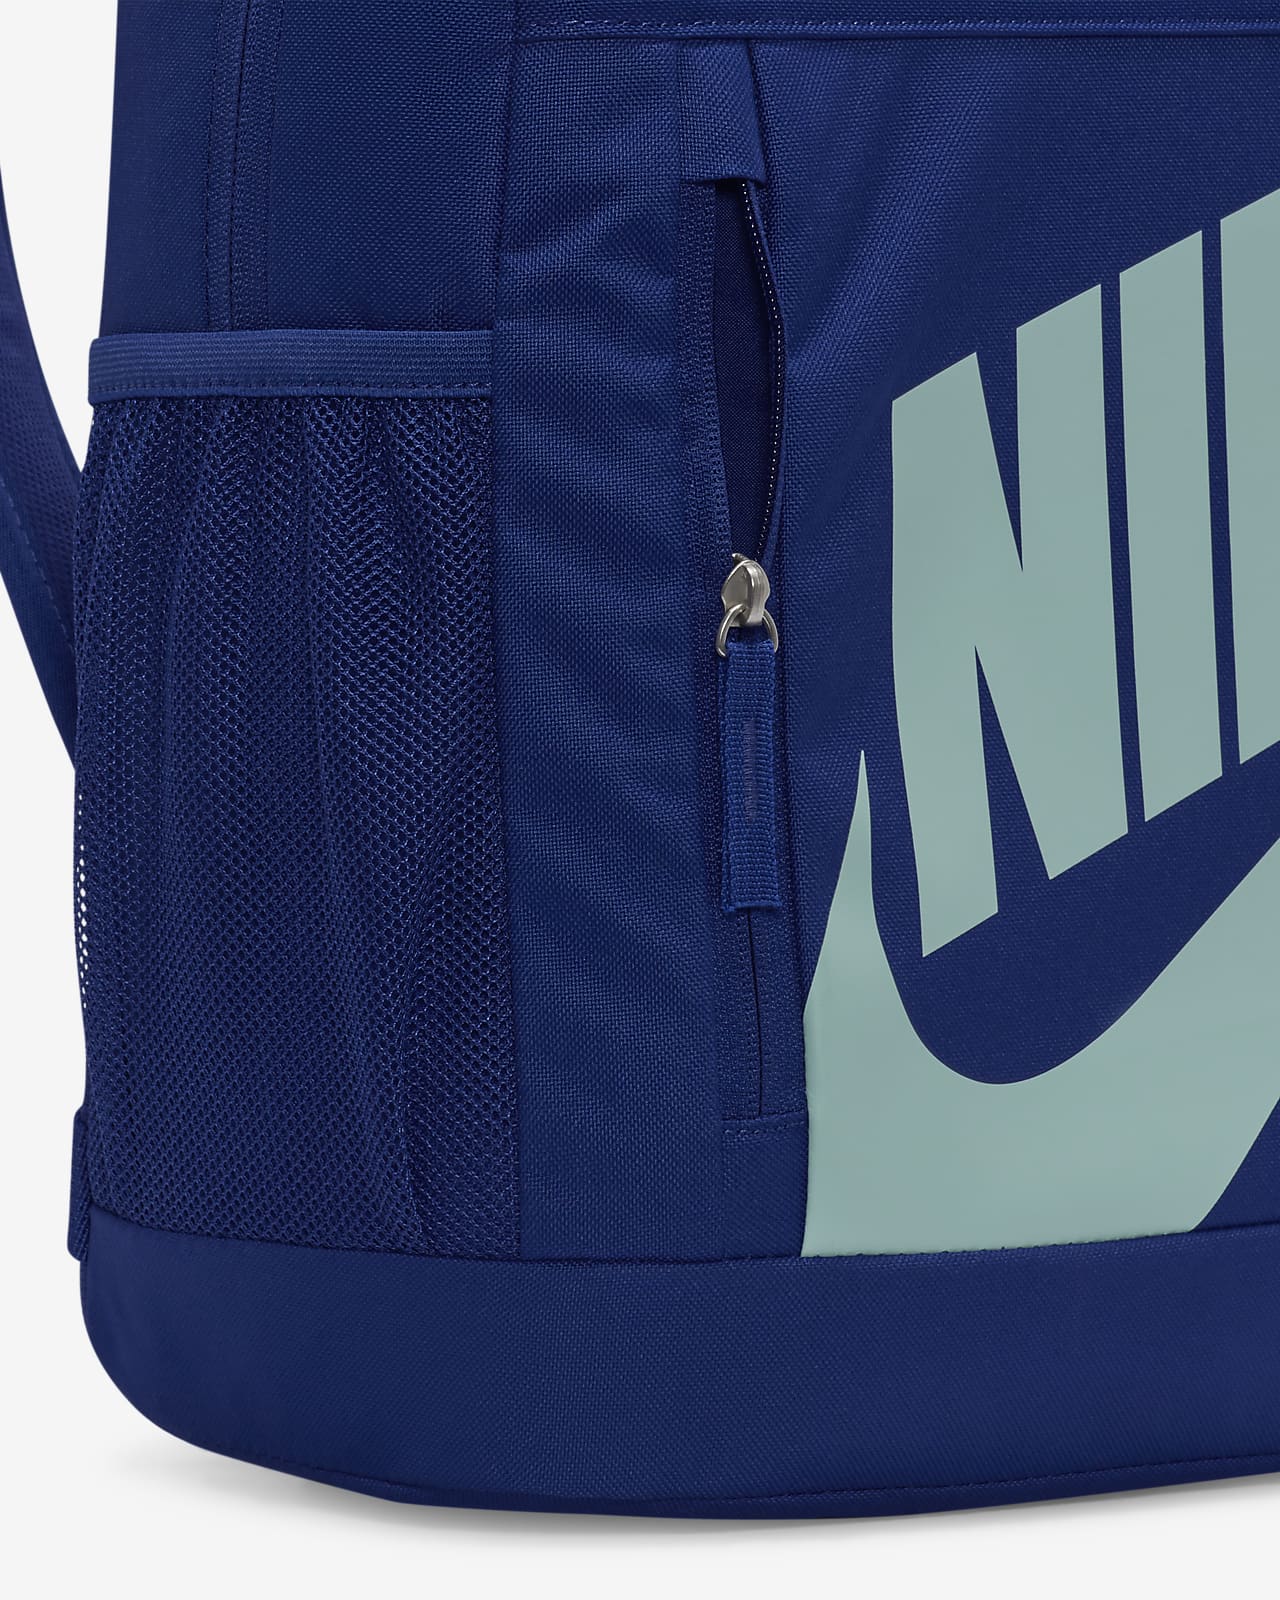 Nike Elemental 20L Backpack with Pencil Case Green